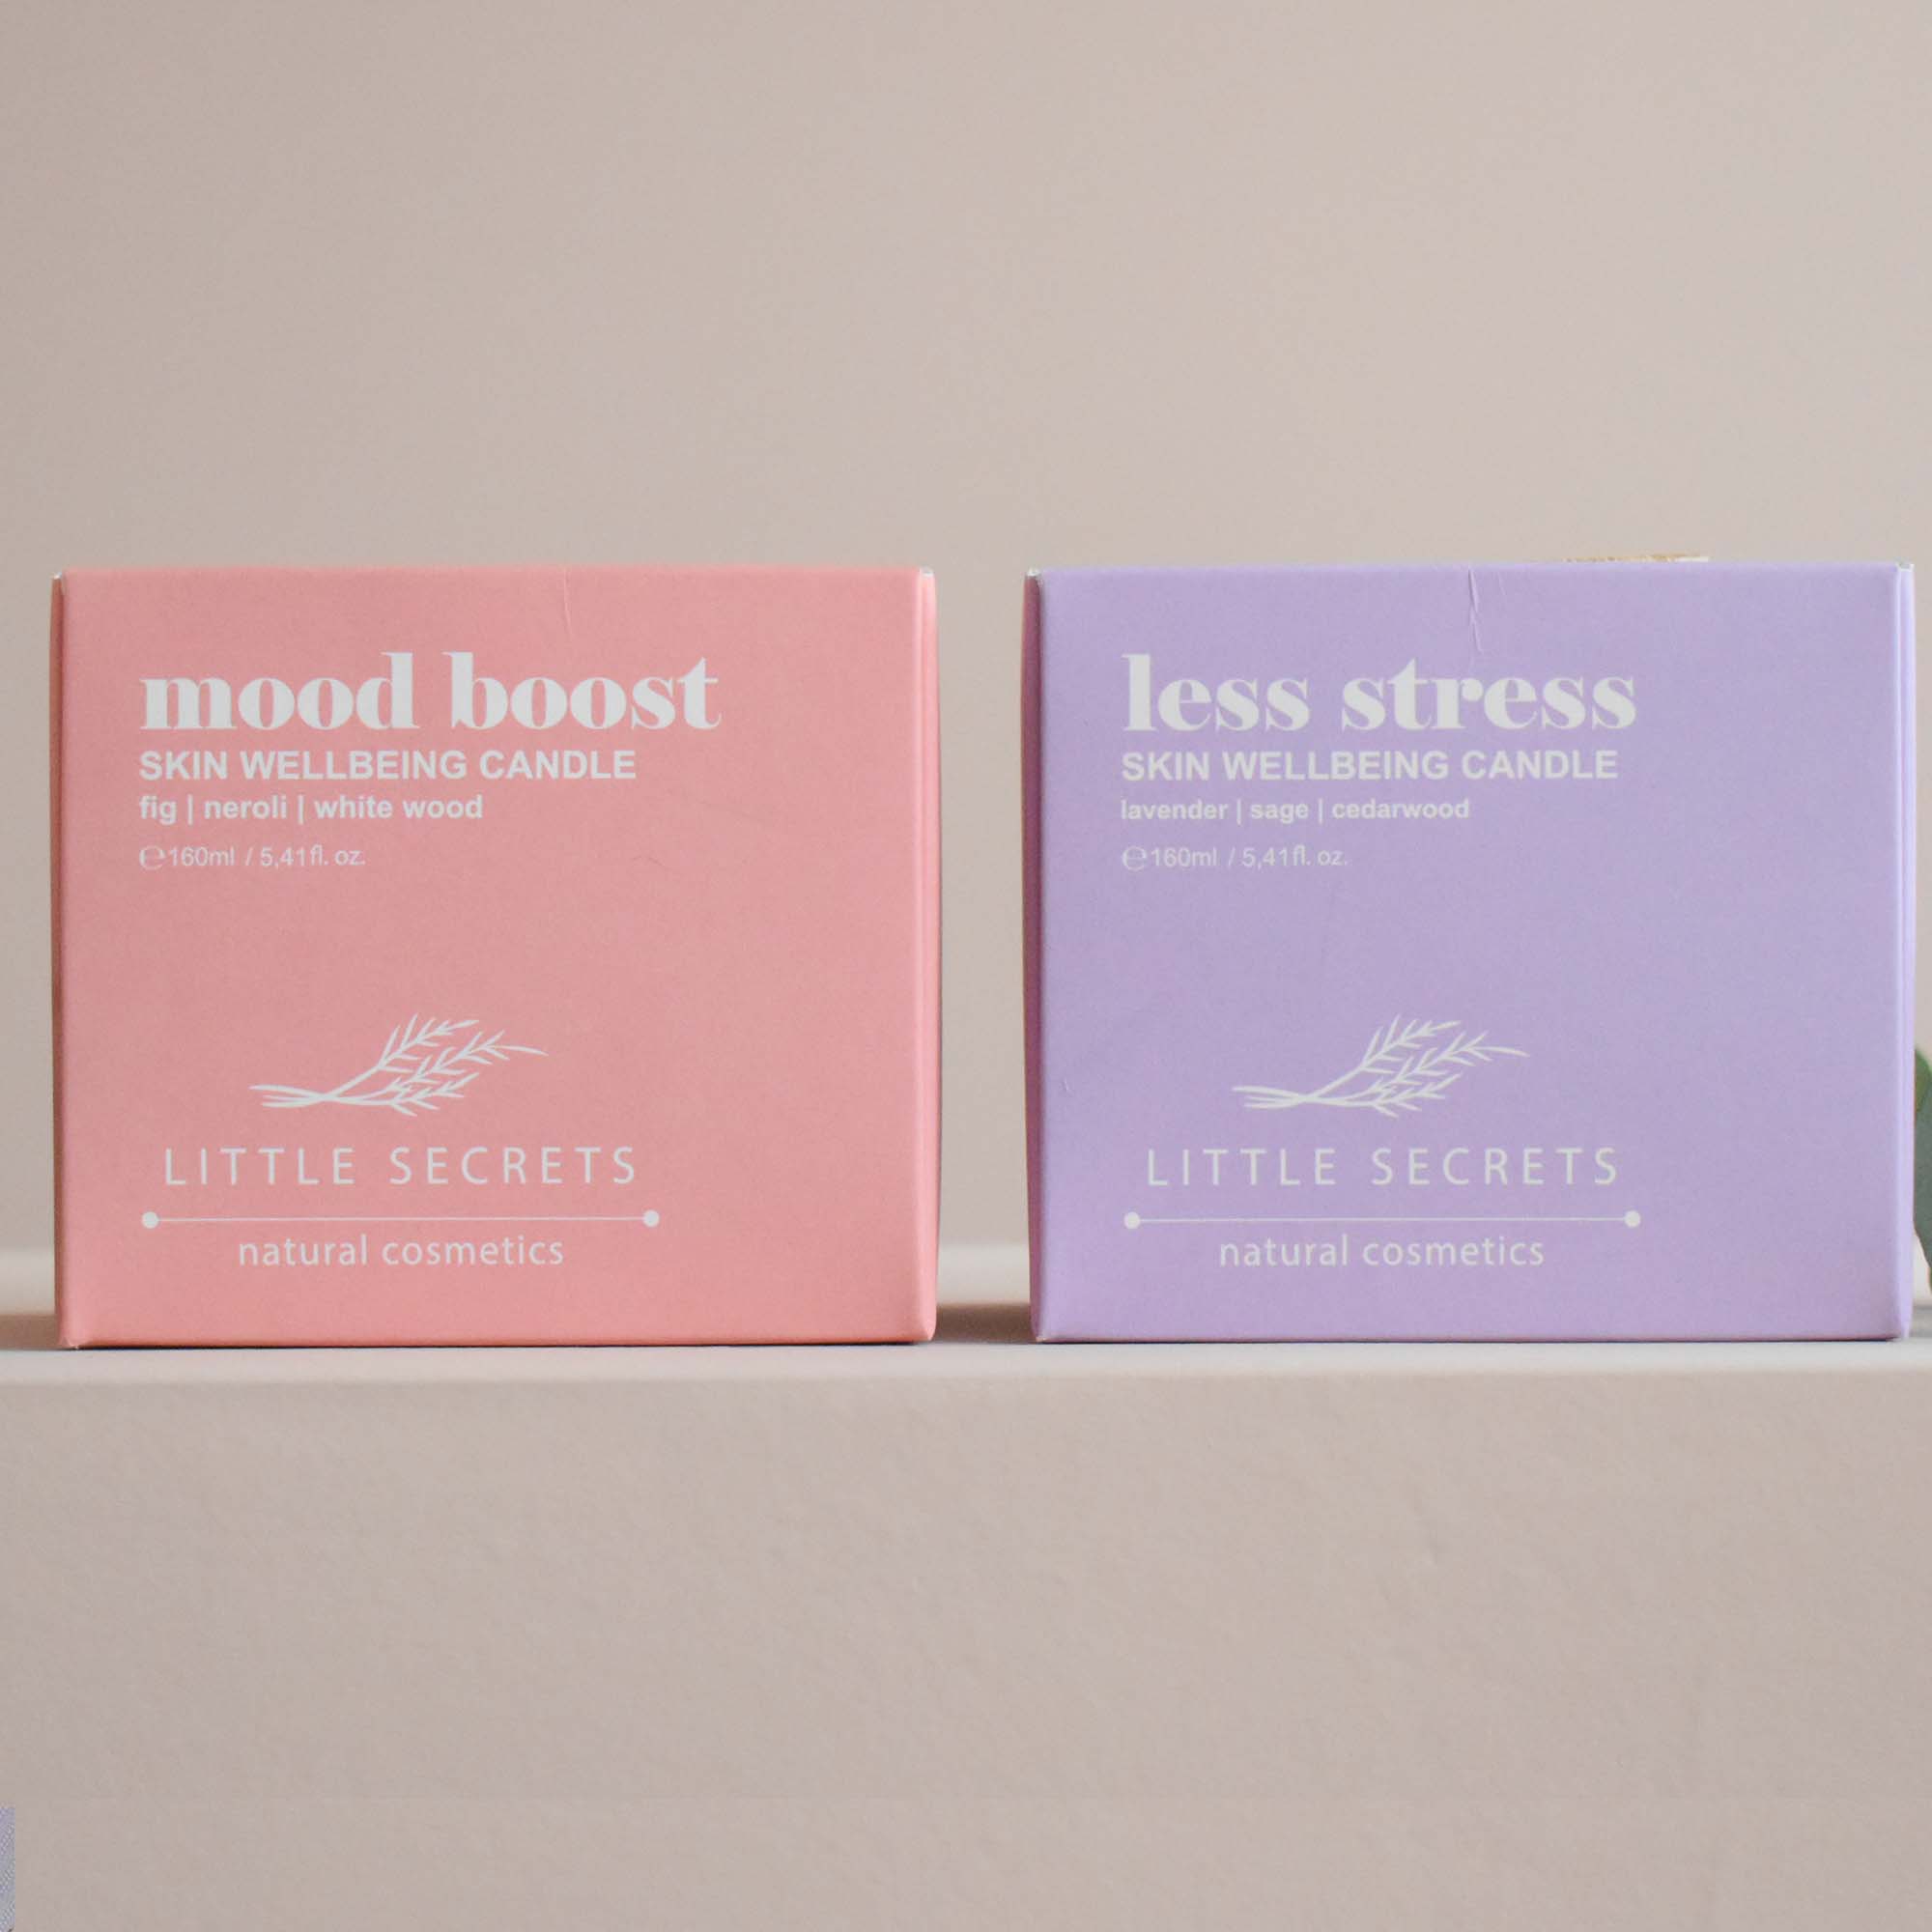 Less Stress Skin Wellbeing Candle 2